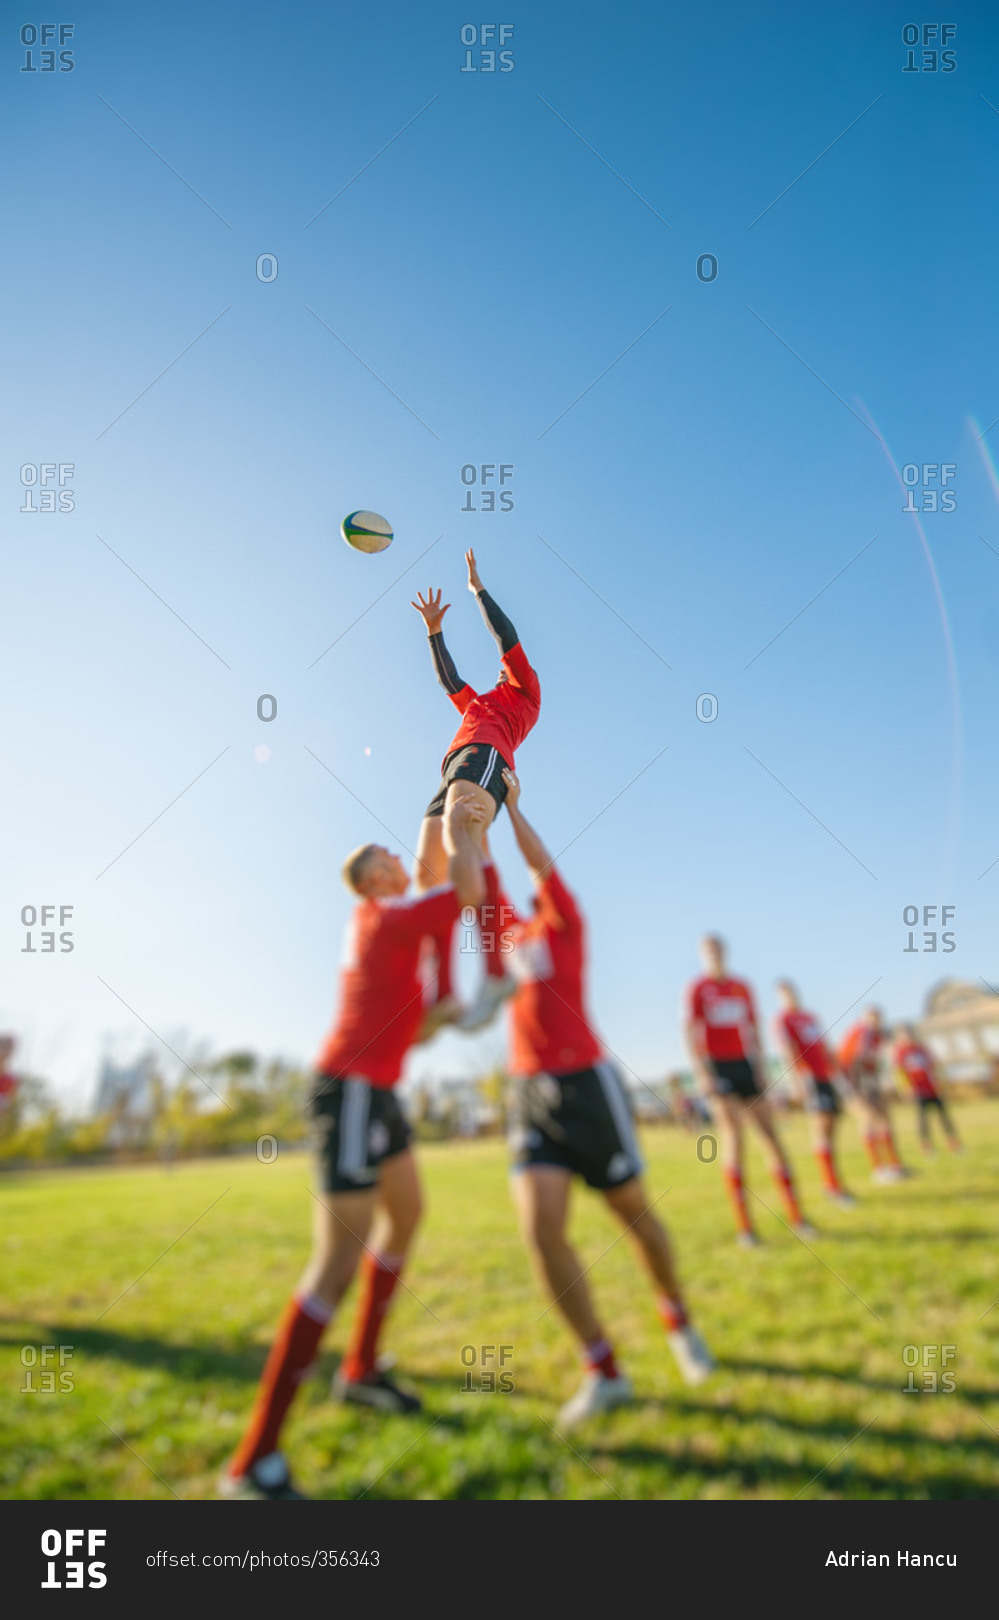 Rugby Union players performing a lineout lifting during preparation exercise for the big game